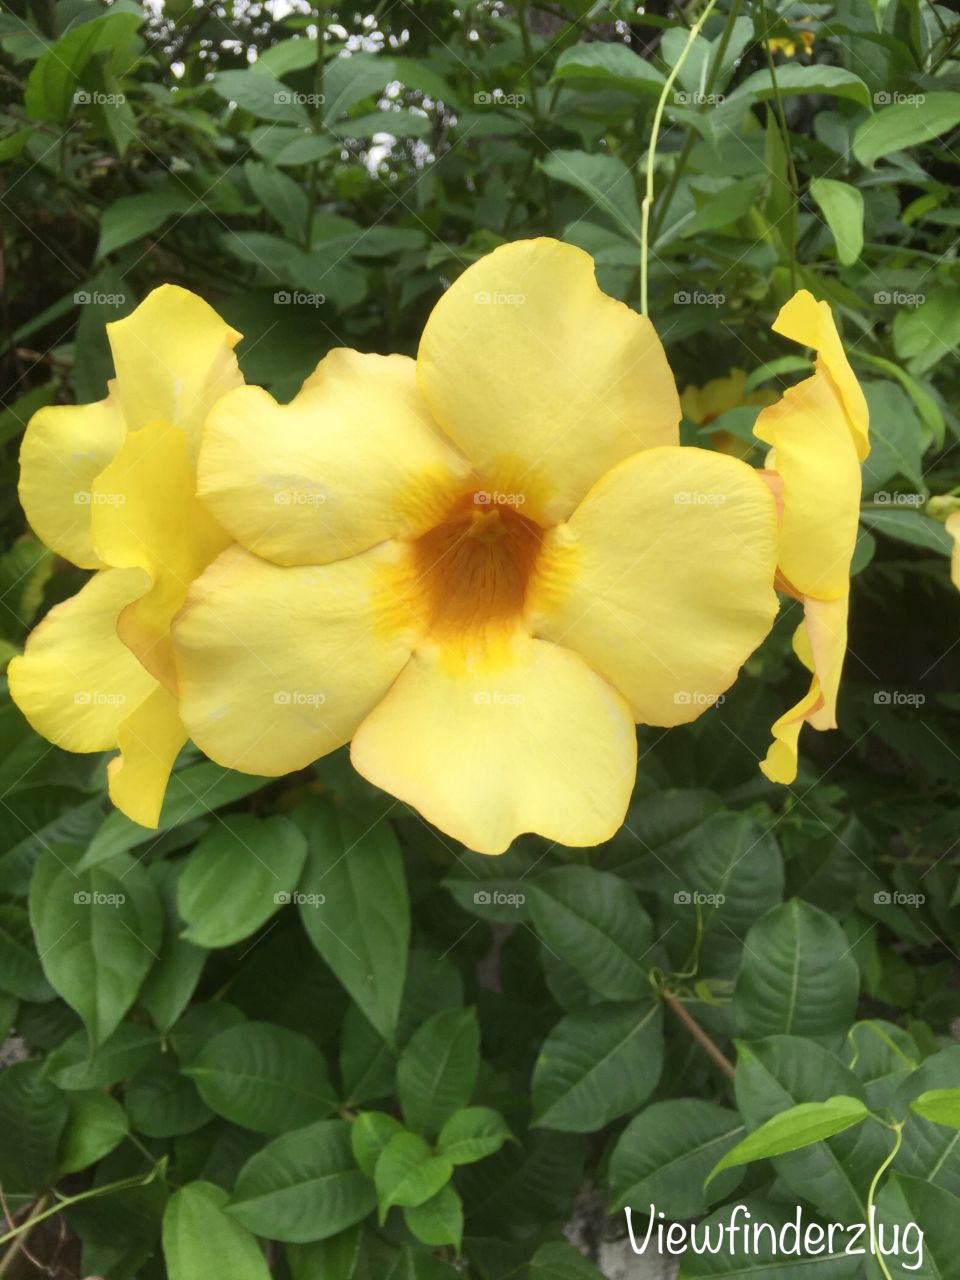 The ‘ Yellow Bell ‘ 